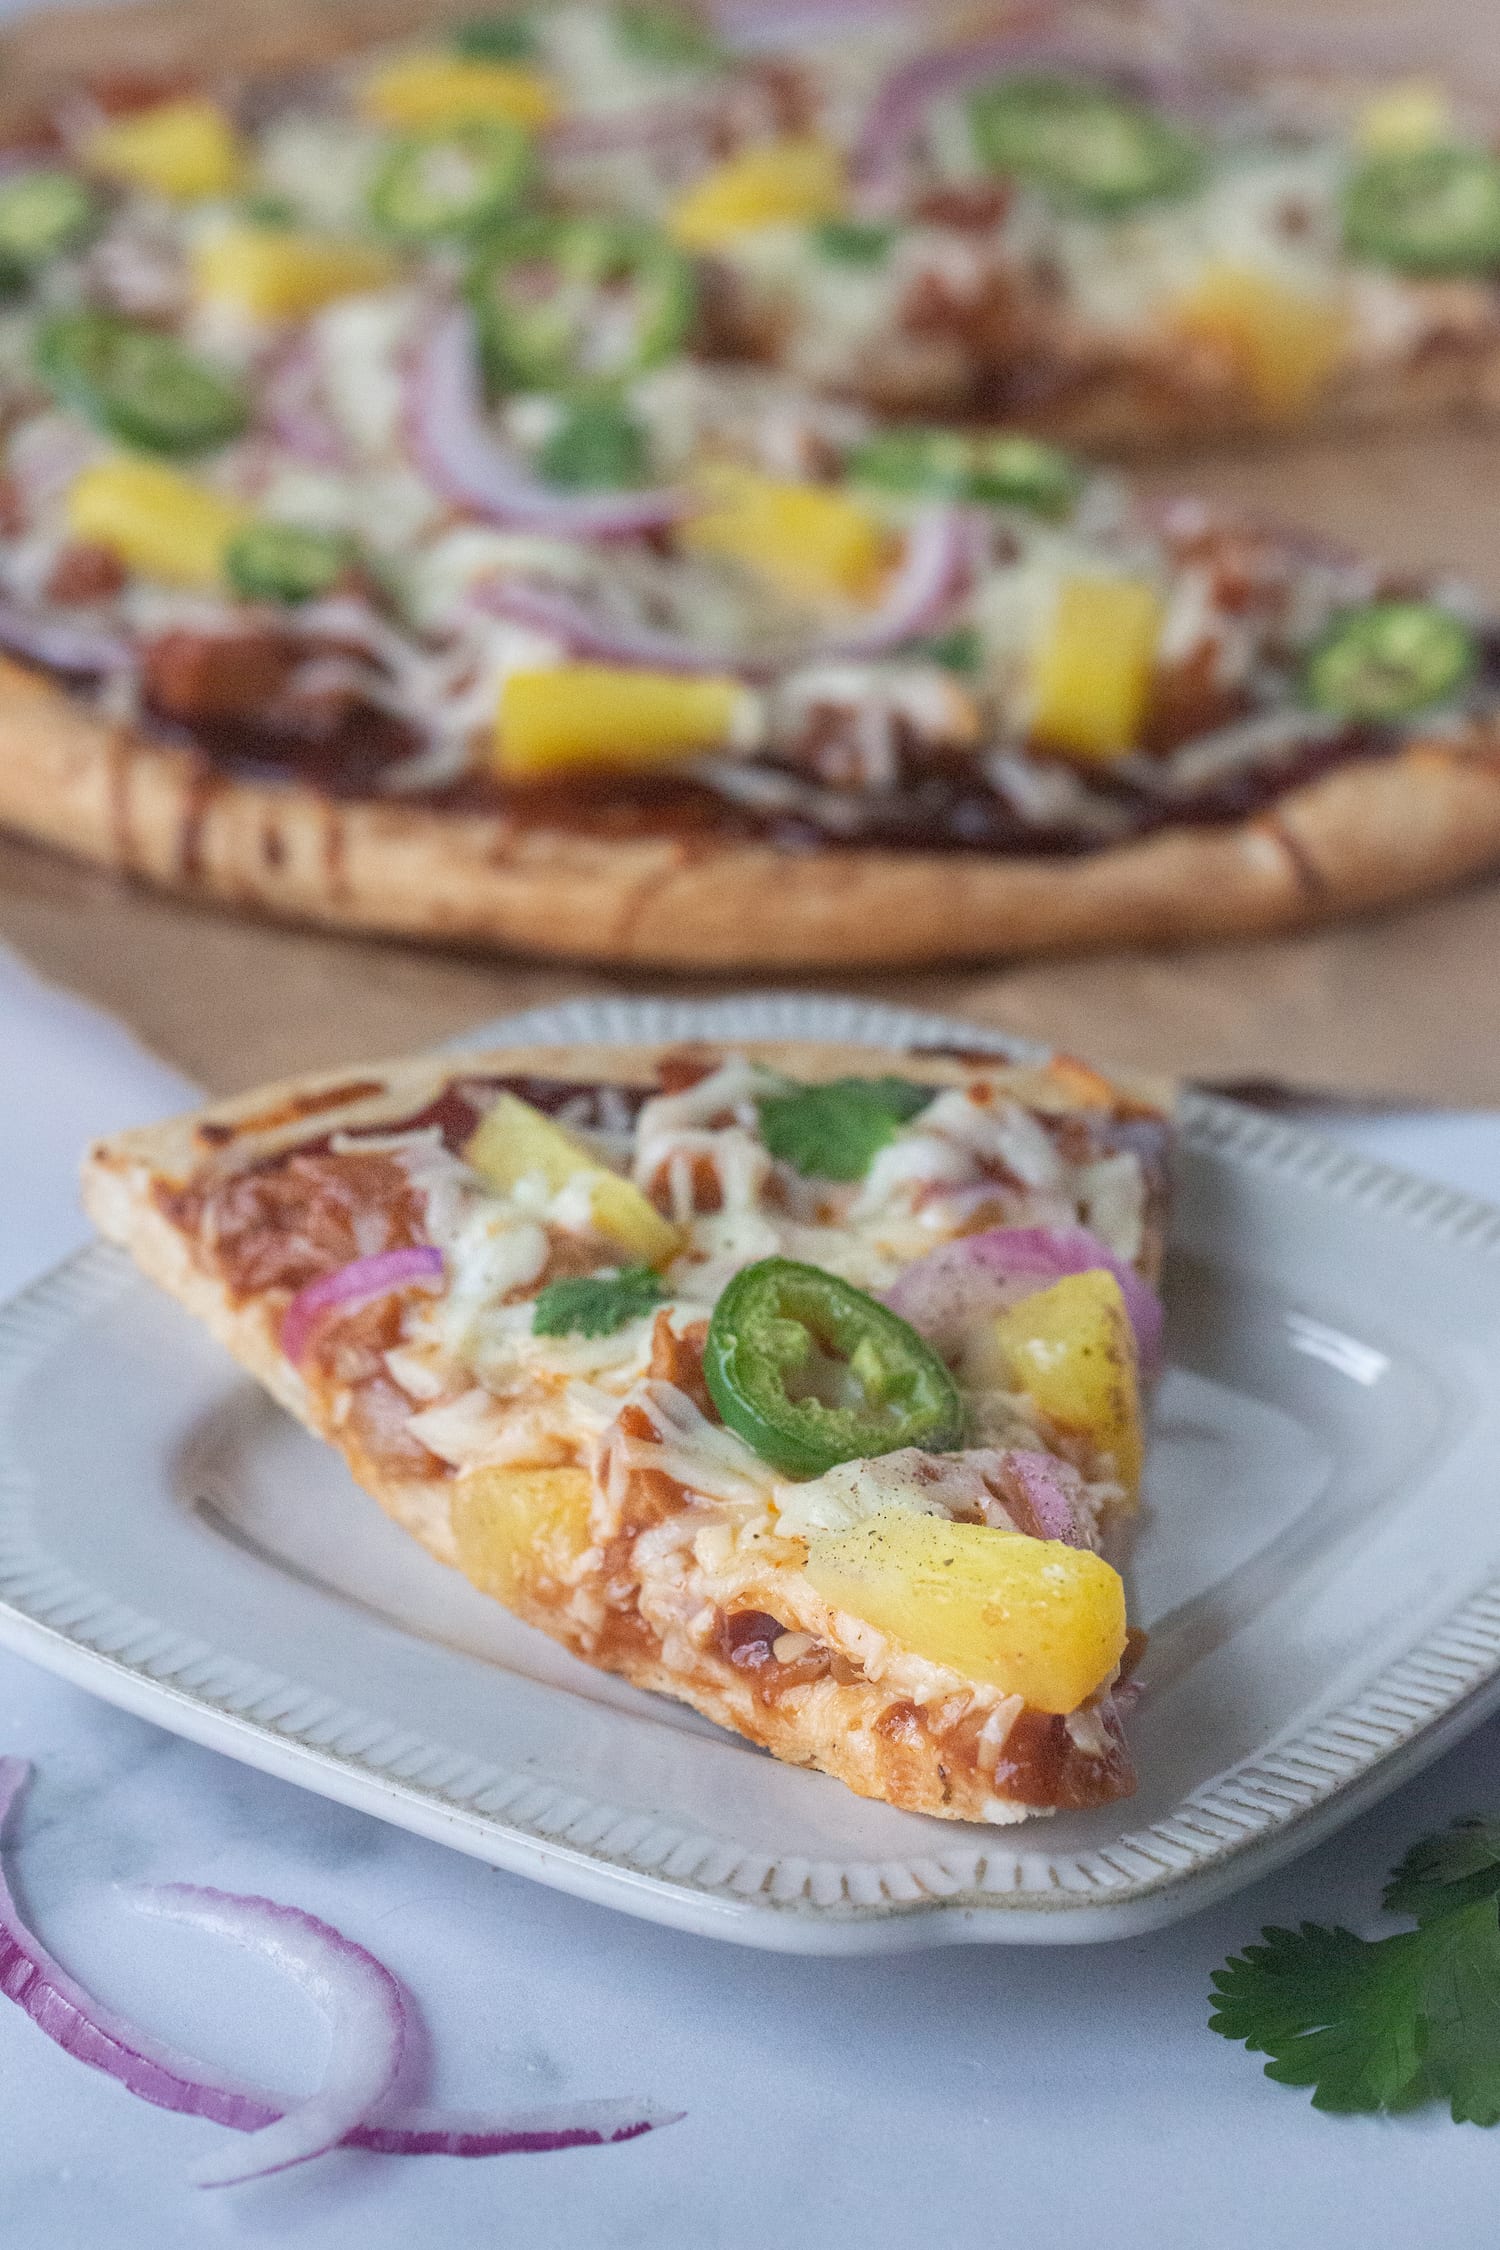 Picture of a pizza topped with barbecue sauce, plant-based meat substitute jackfruit, vegan mozzarella, sliced jalapeños, pineapples chunks, and sliced red onion